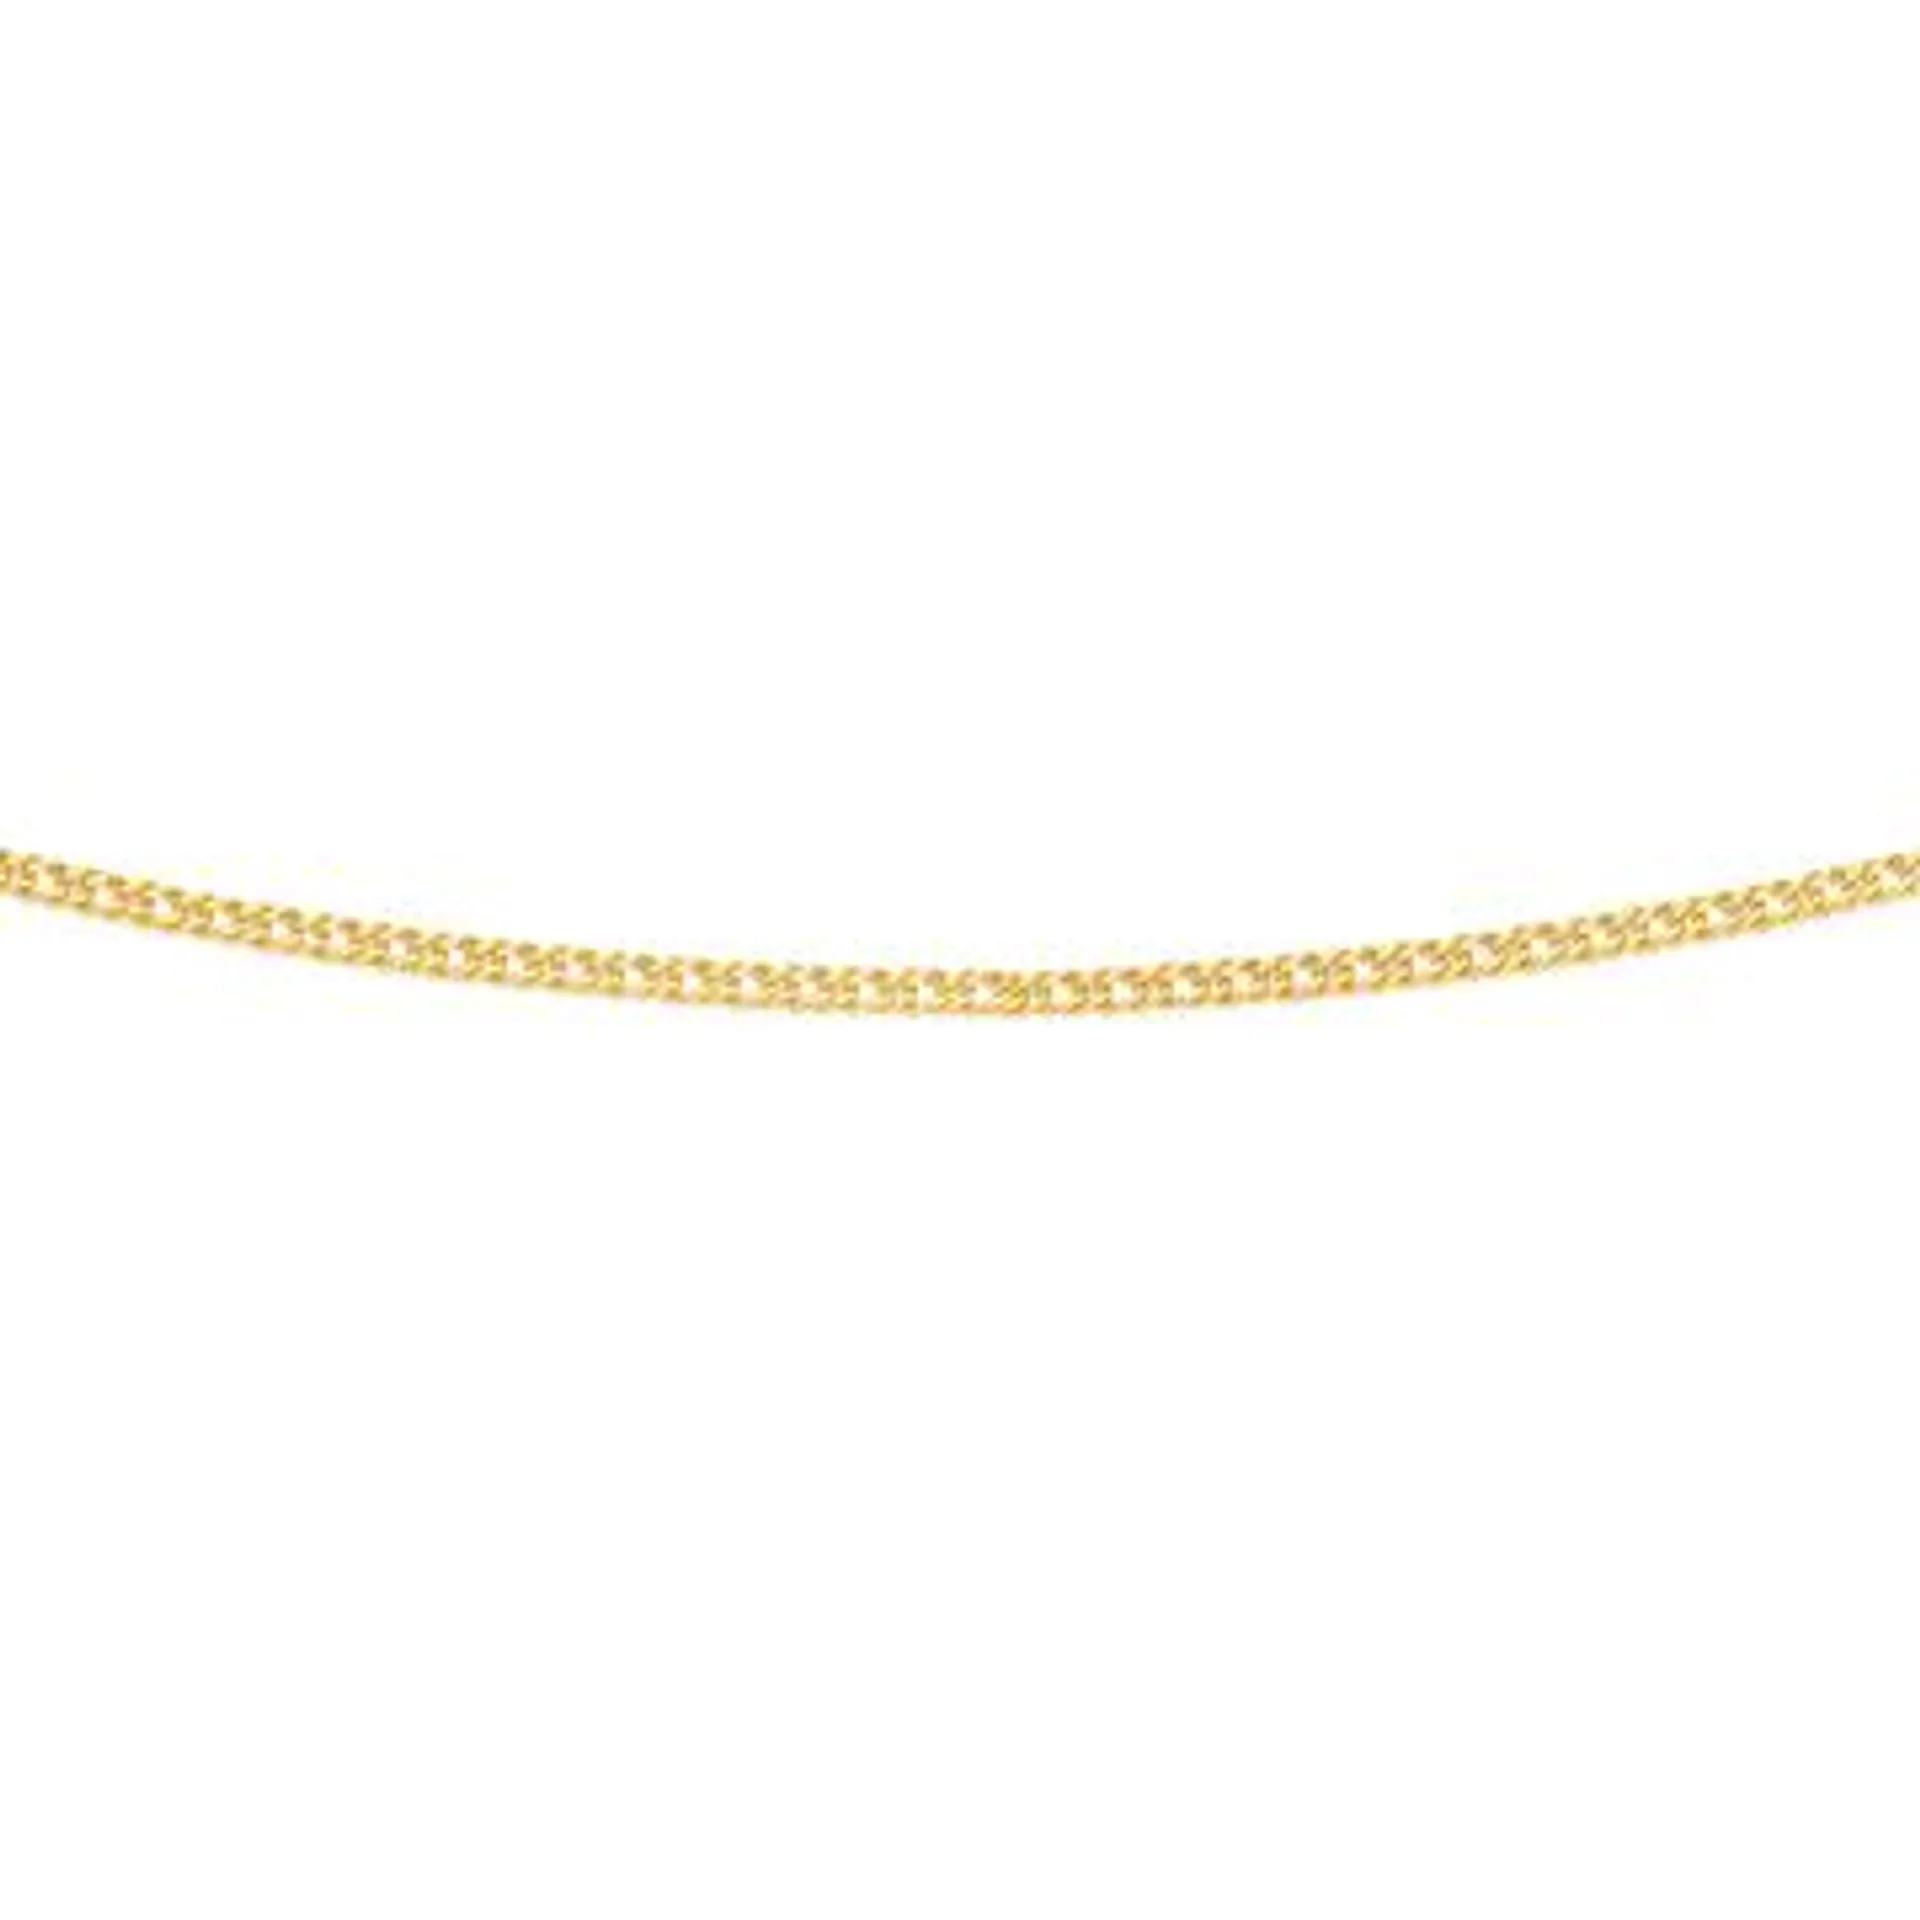 9ct, 55cm Solid Double Curb Chain